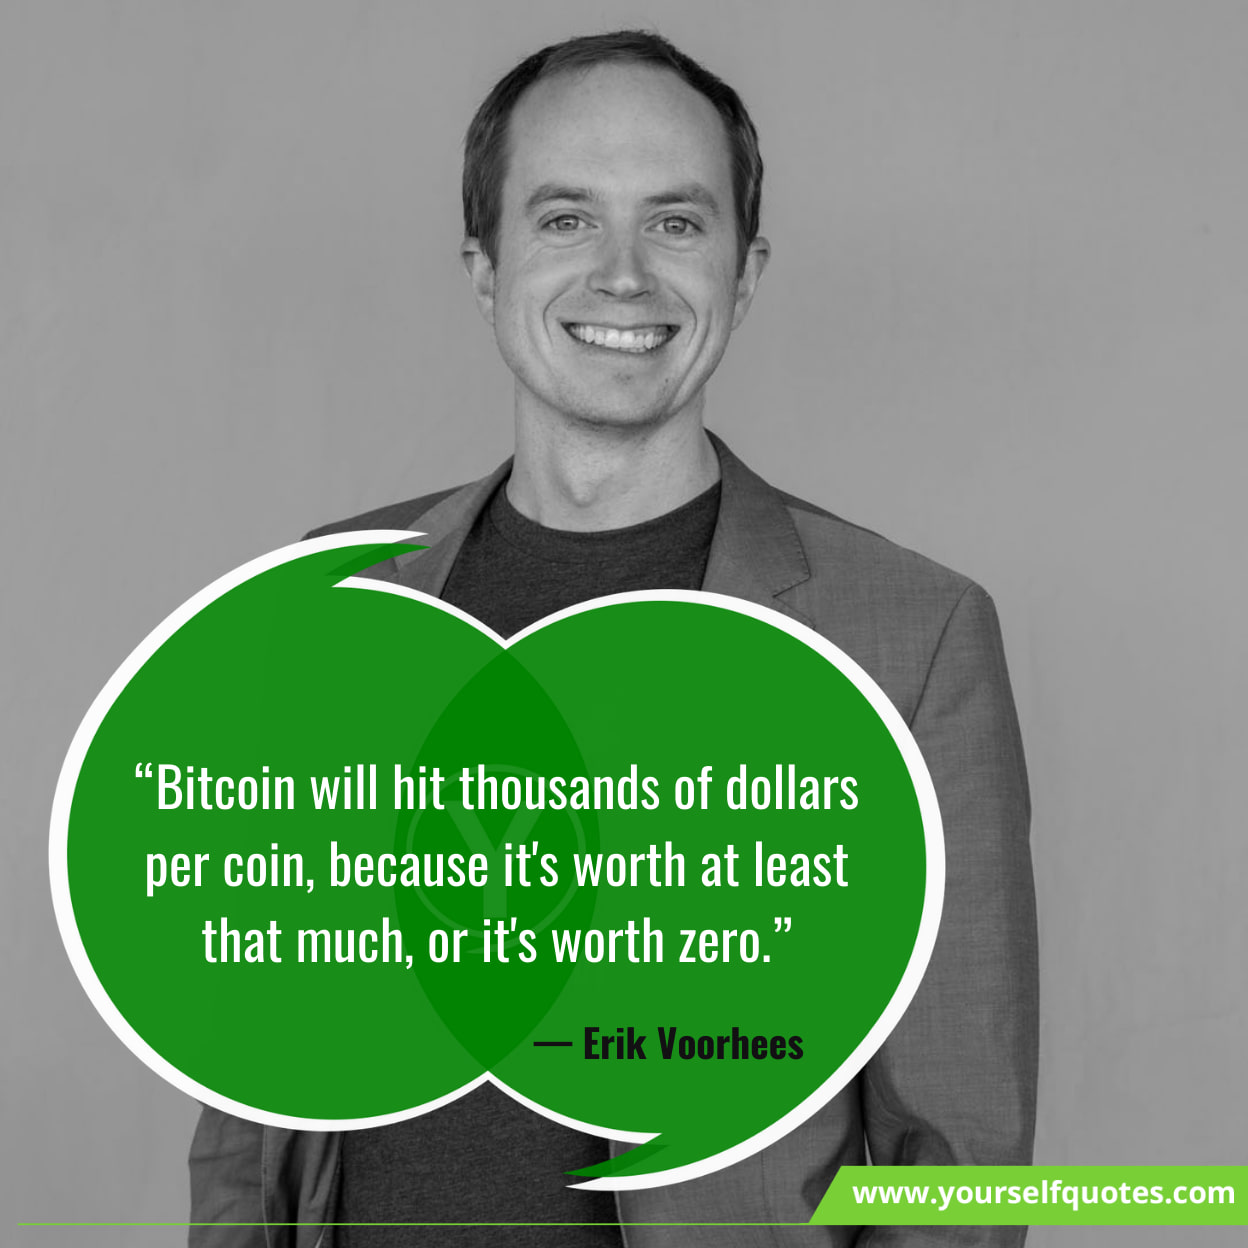 Quotes On Future of Bitcoin